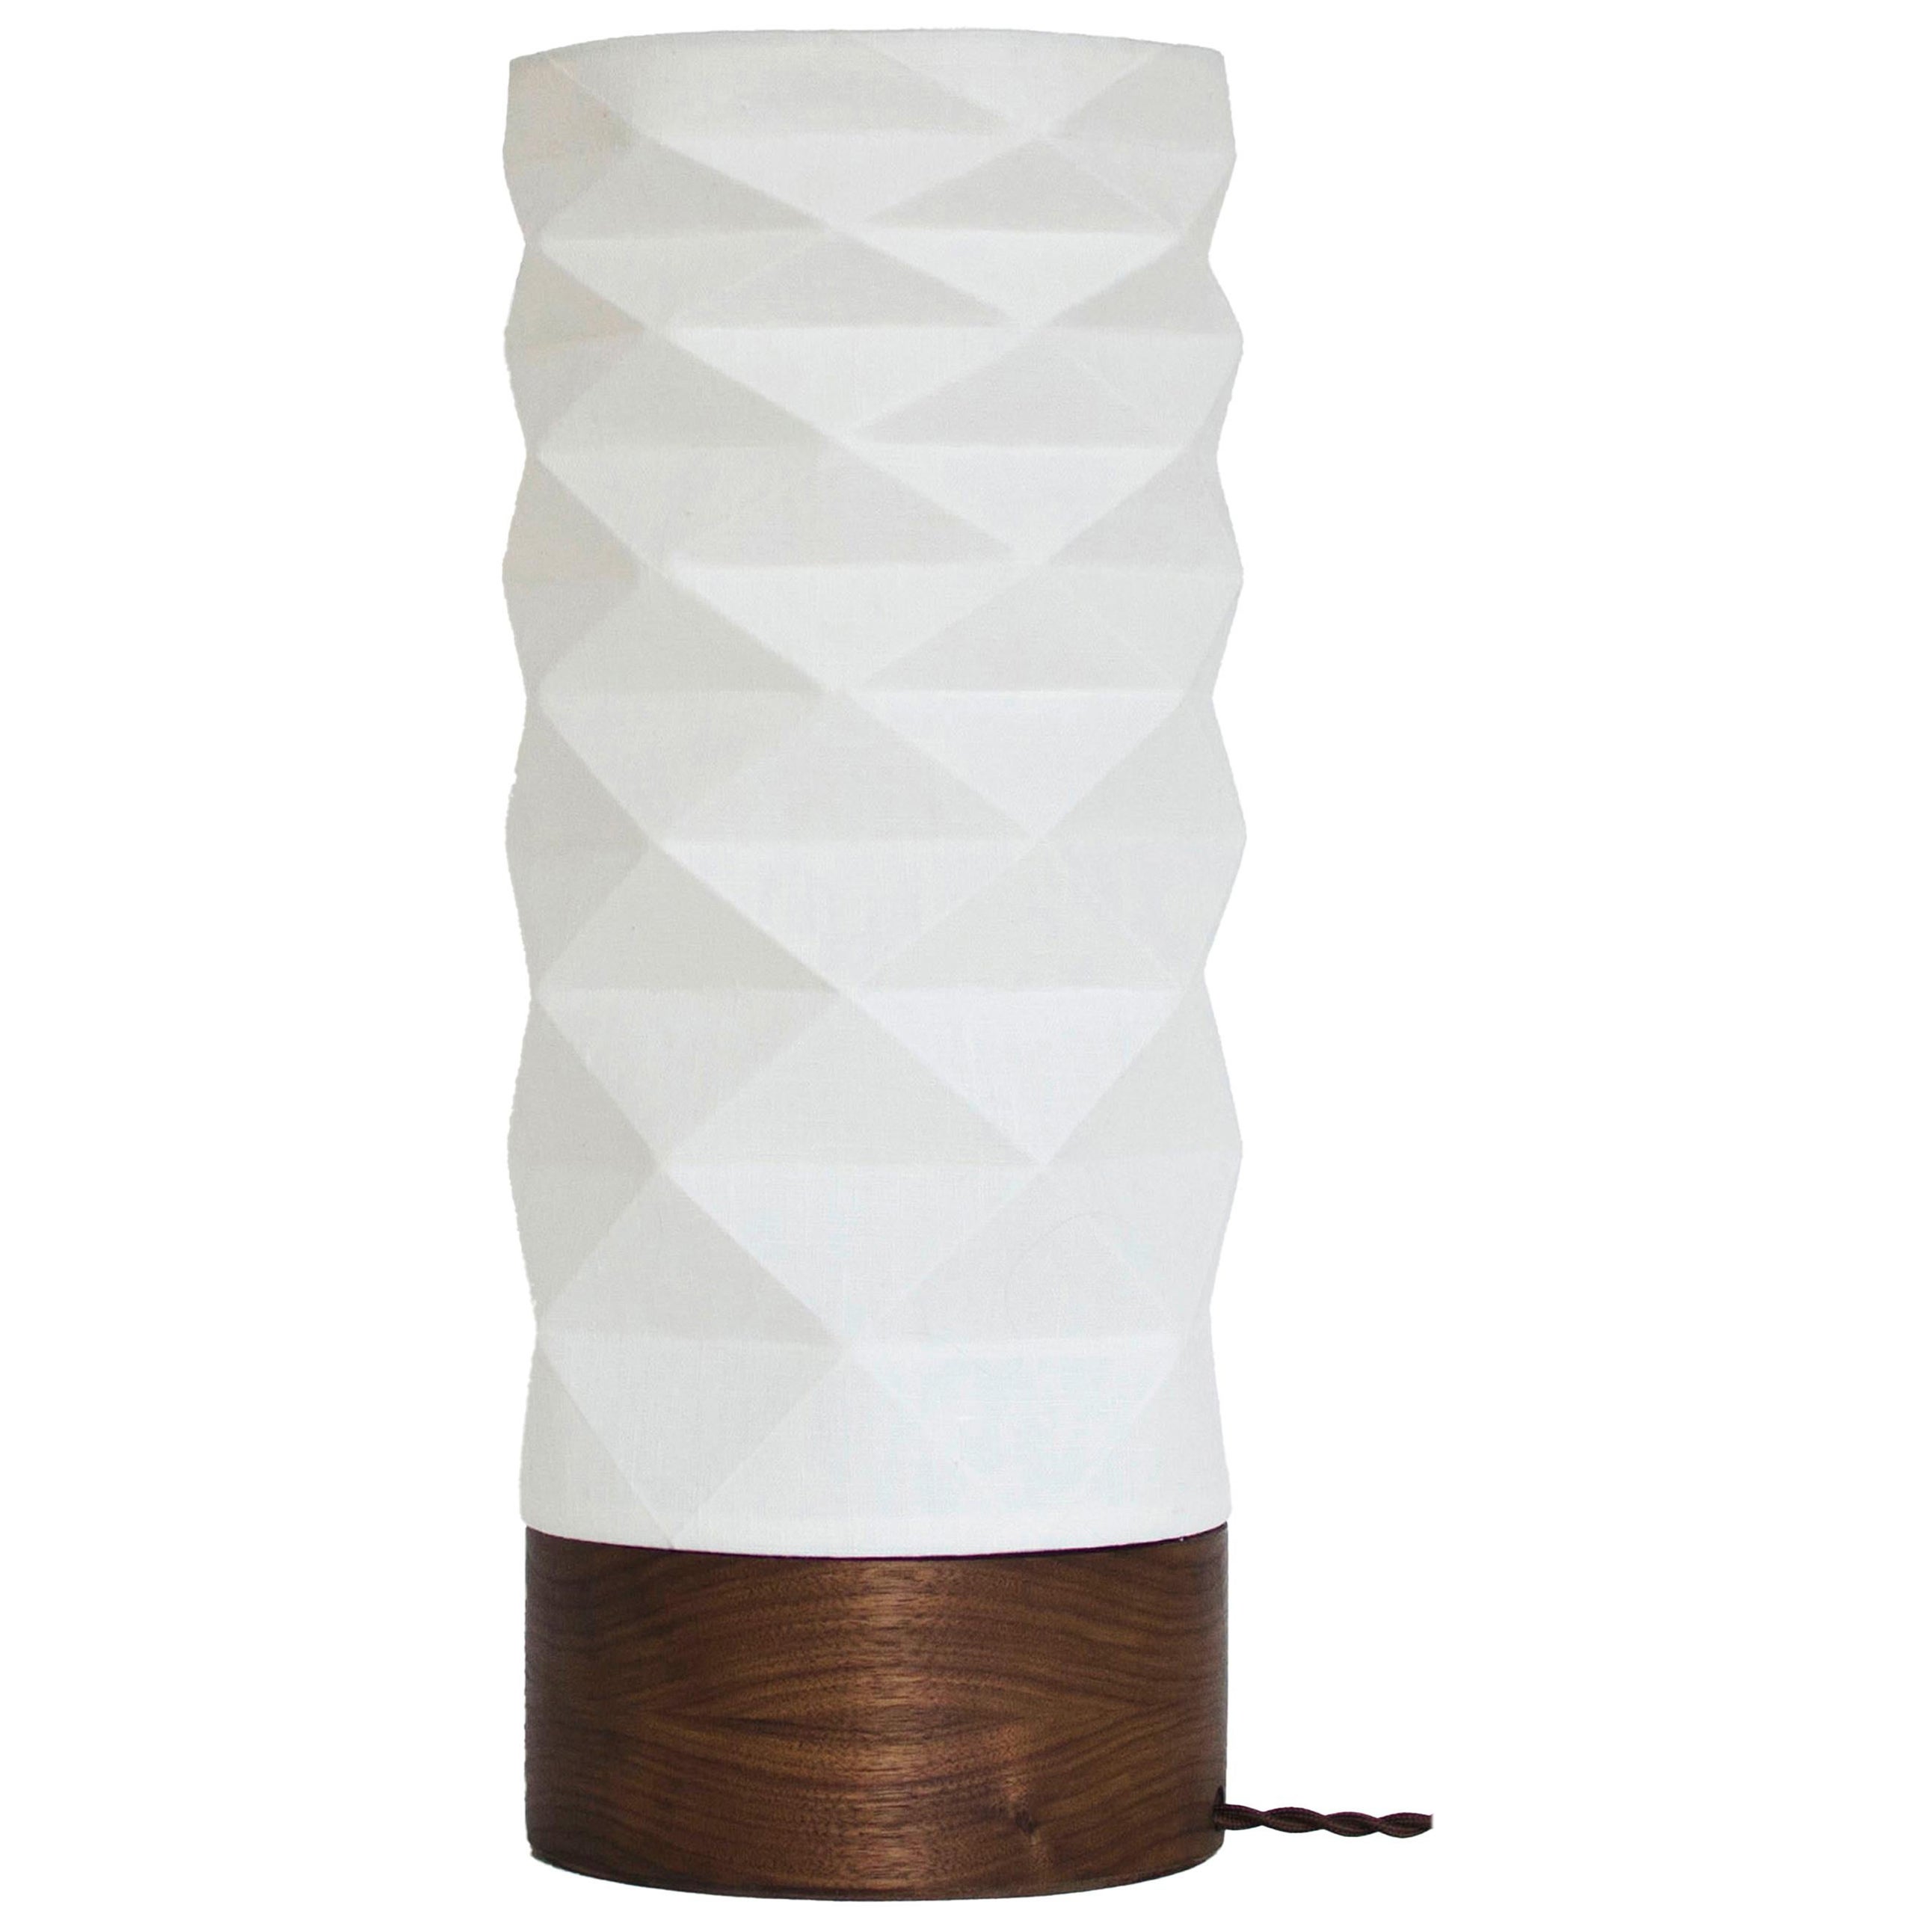 Modern Table Lamp with Round Base by La Loupe